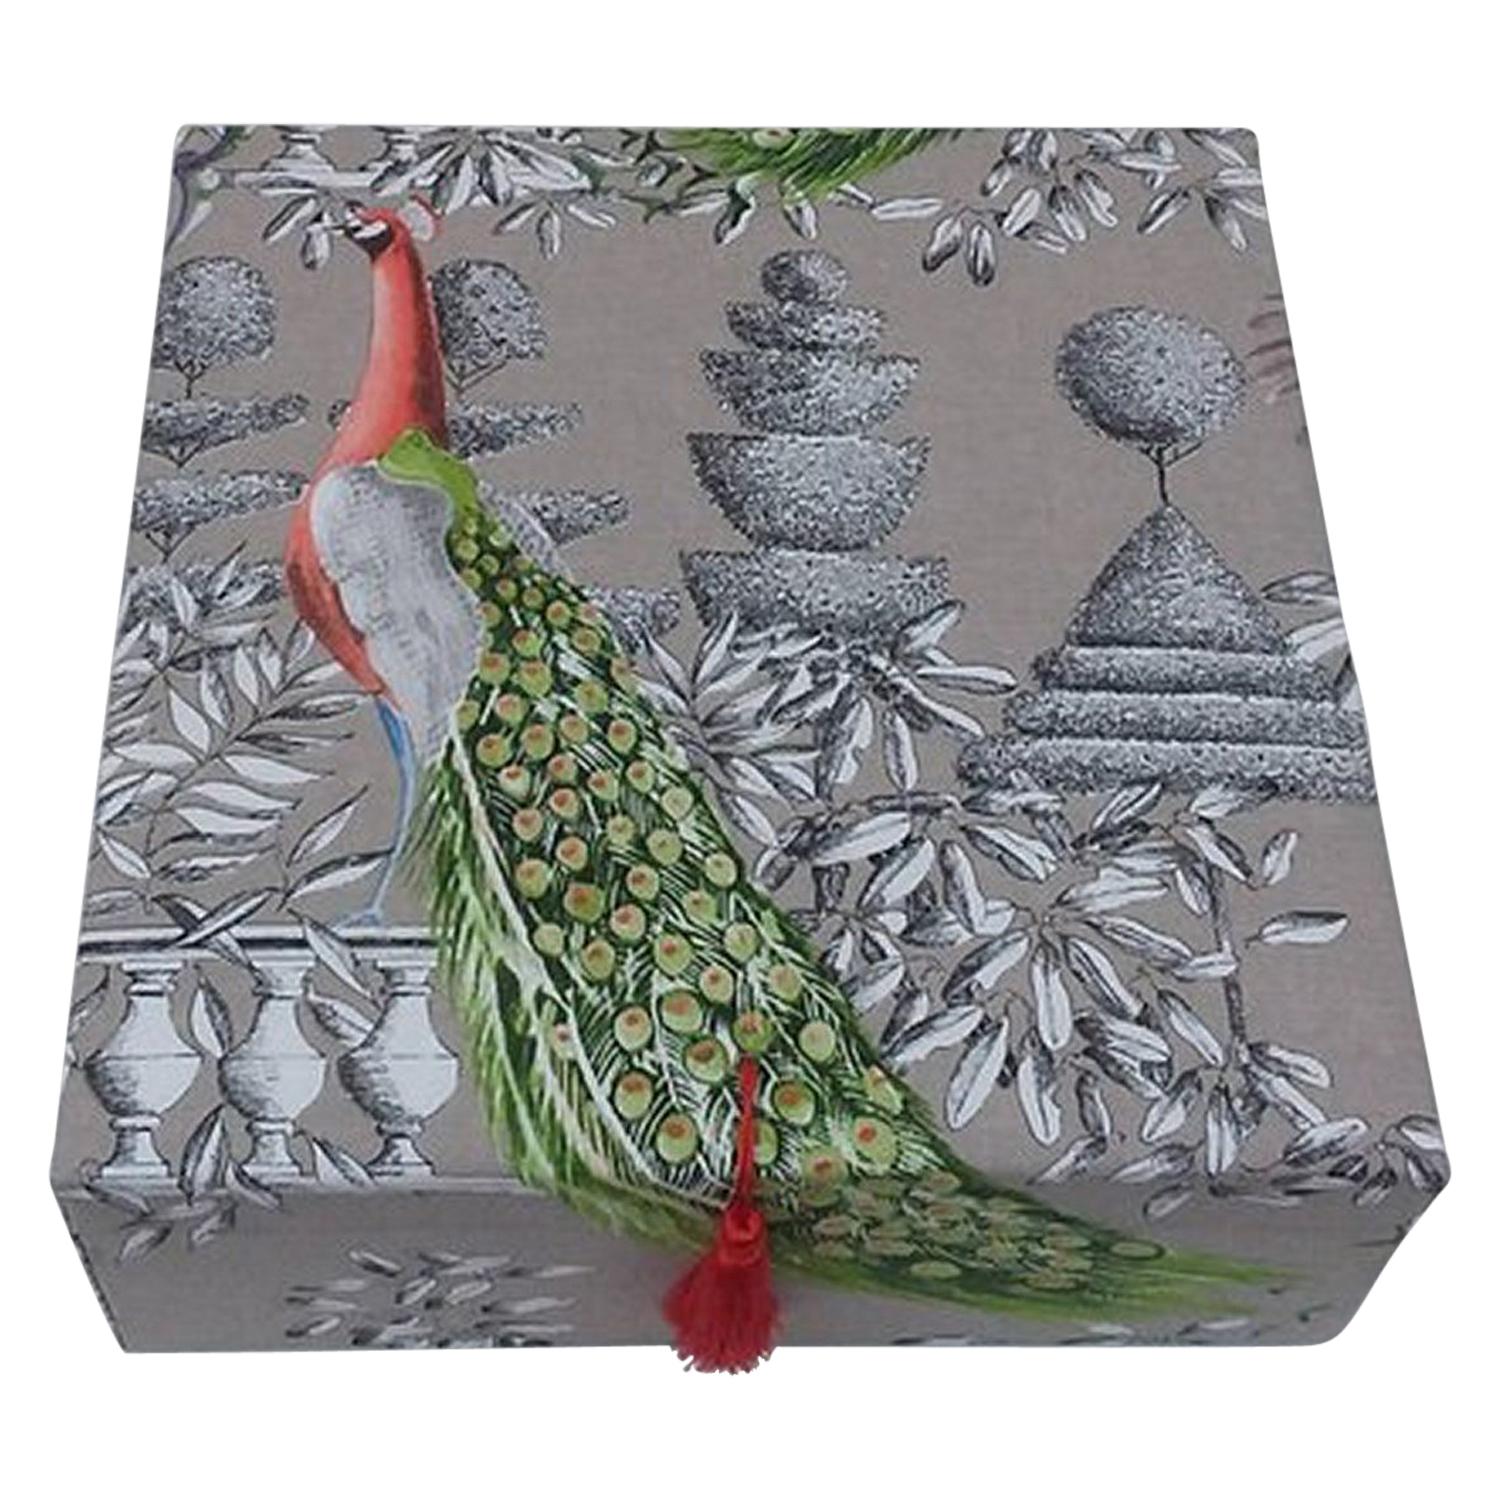 Birds Printed Fabric Decorative Storage Box for Scarves Handmade in France